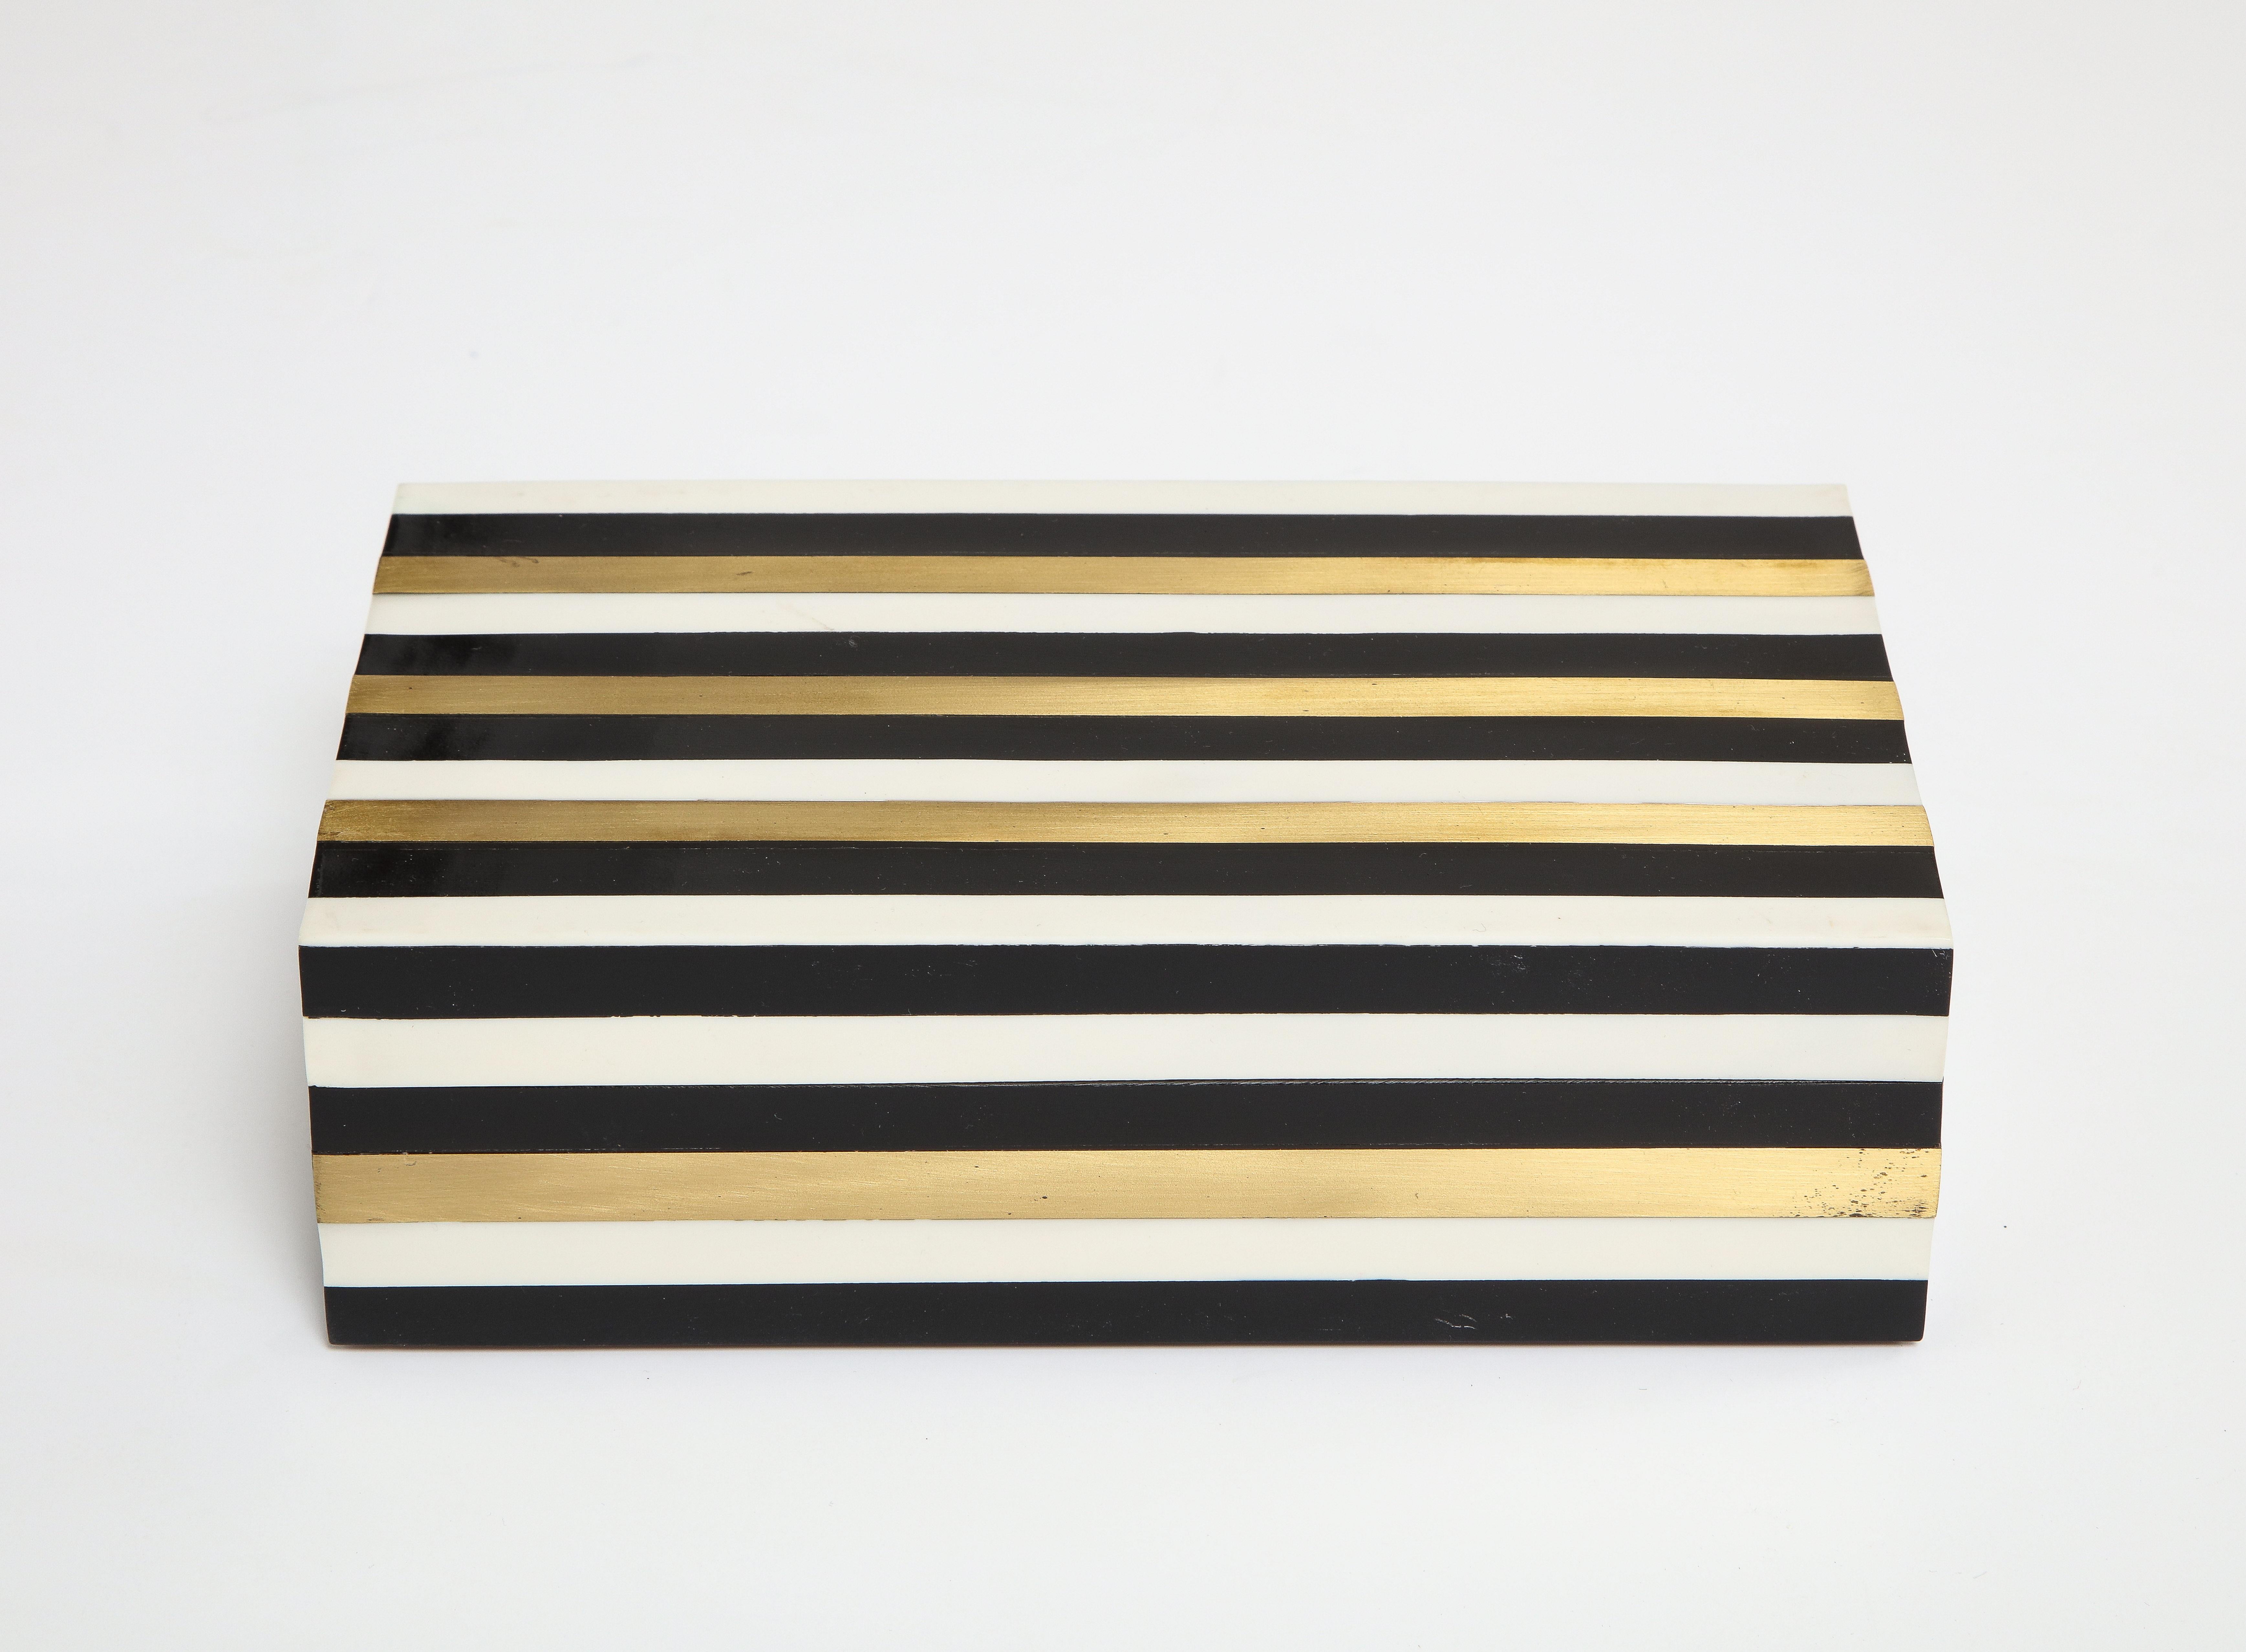 Modernist keepsake, document box clad in Black, White resin stripes accented with brass inlay stripes.